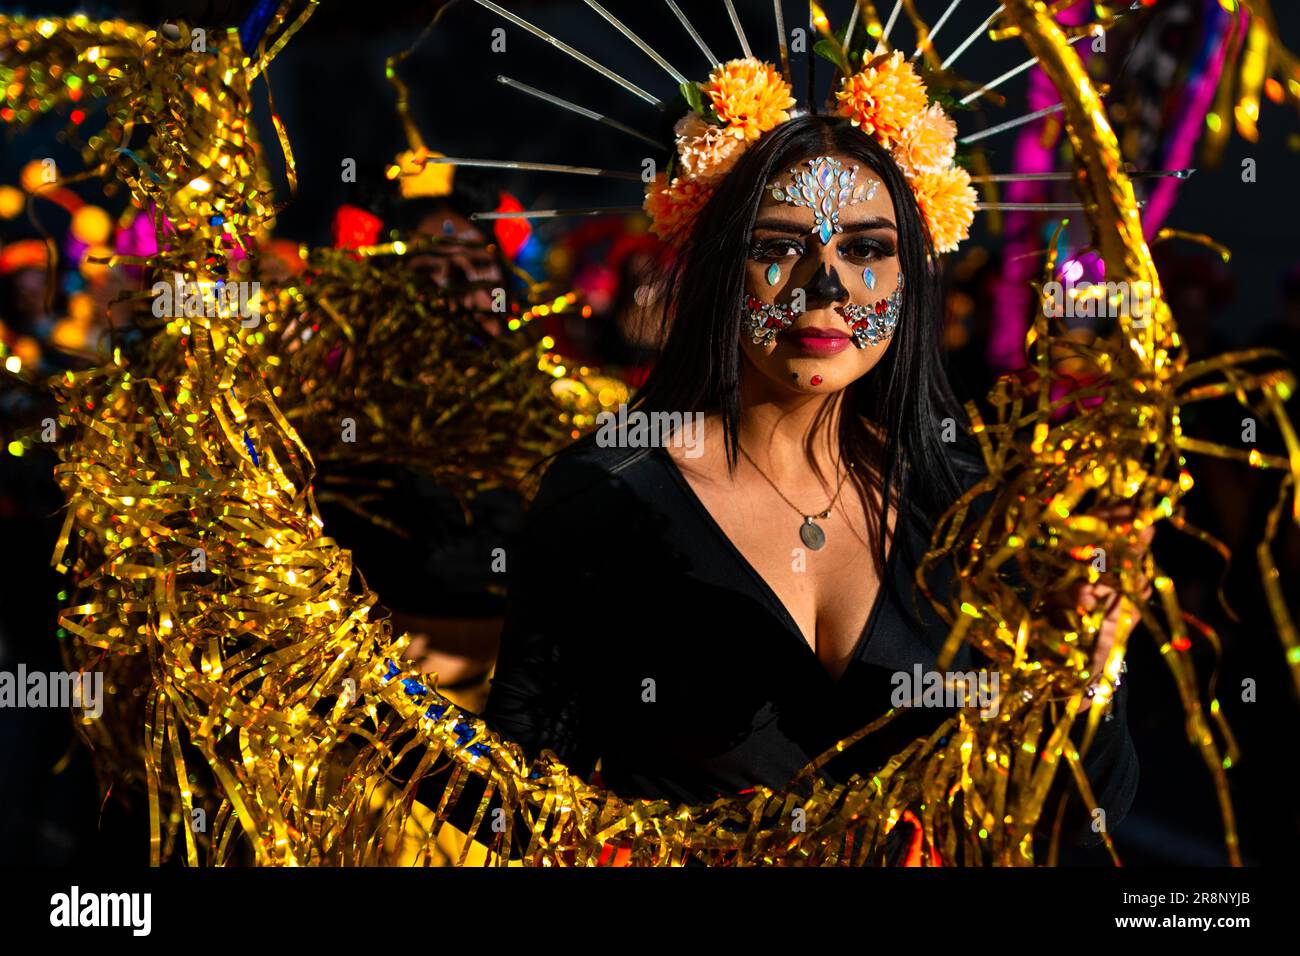 A young Mexican woman, wearing La Catrina face paint, performs a dance act during the Day of the Dead festivities in Guadalajara, Jalisco, Mexico. Stock Photo